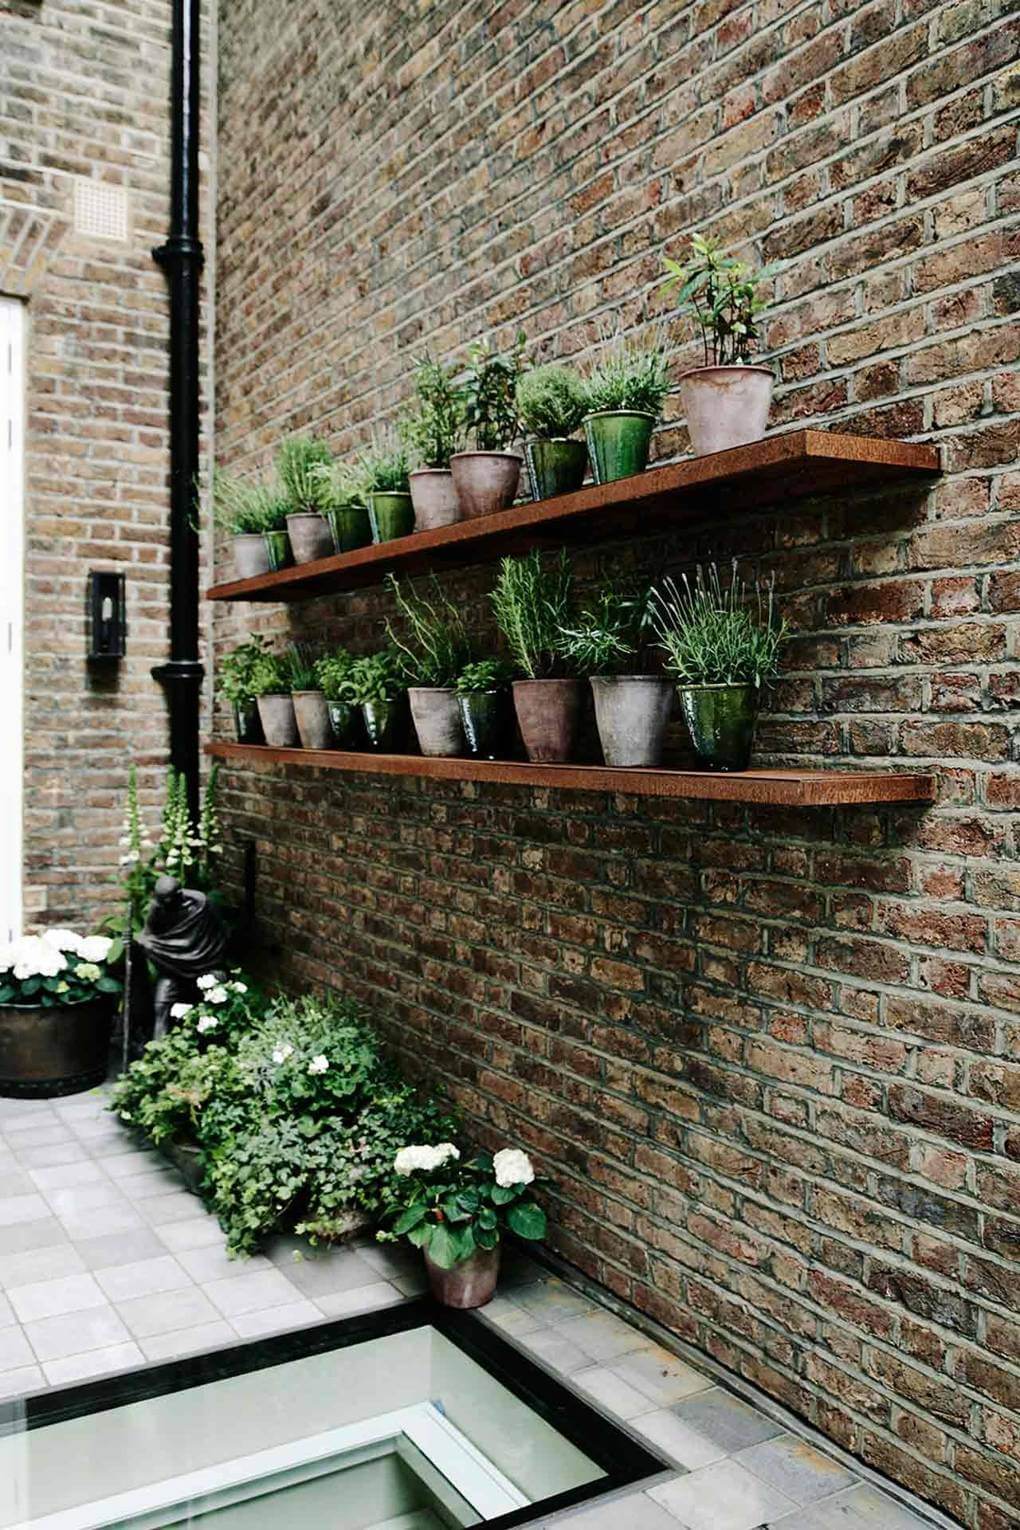 The garden terrace with potted herbs on rusted shelves